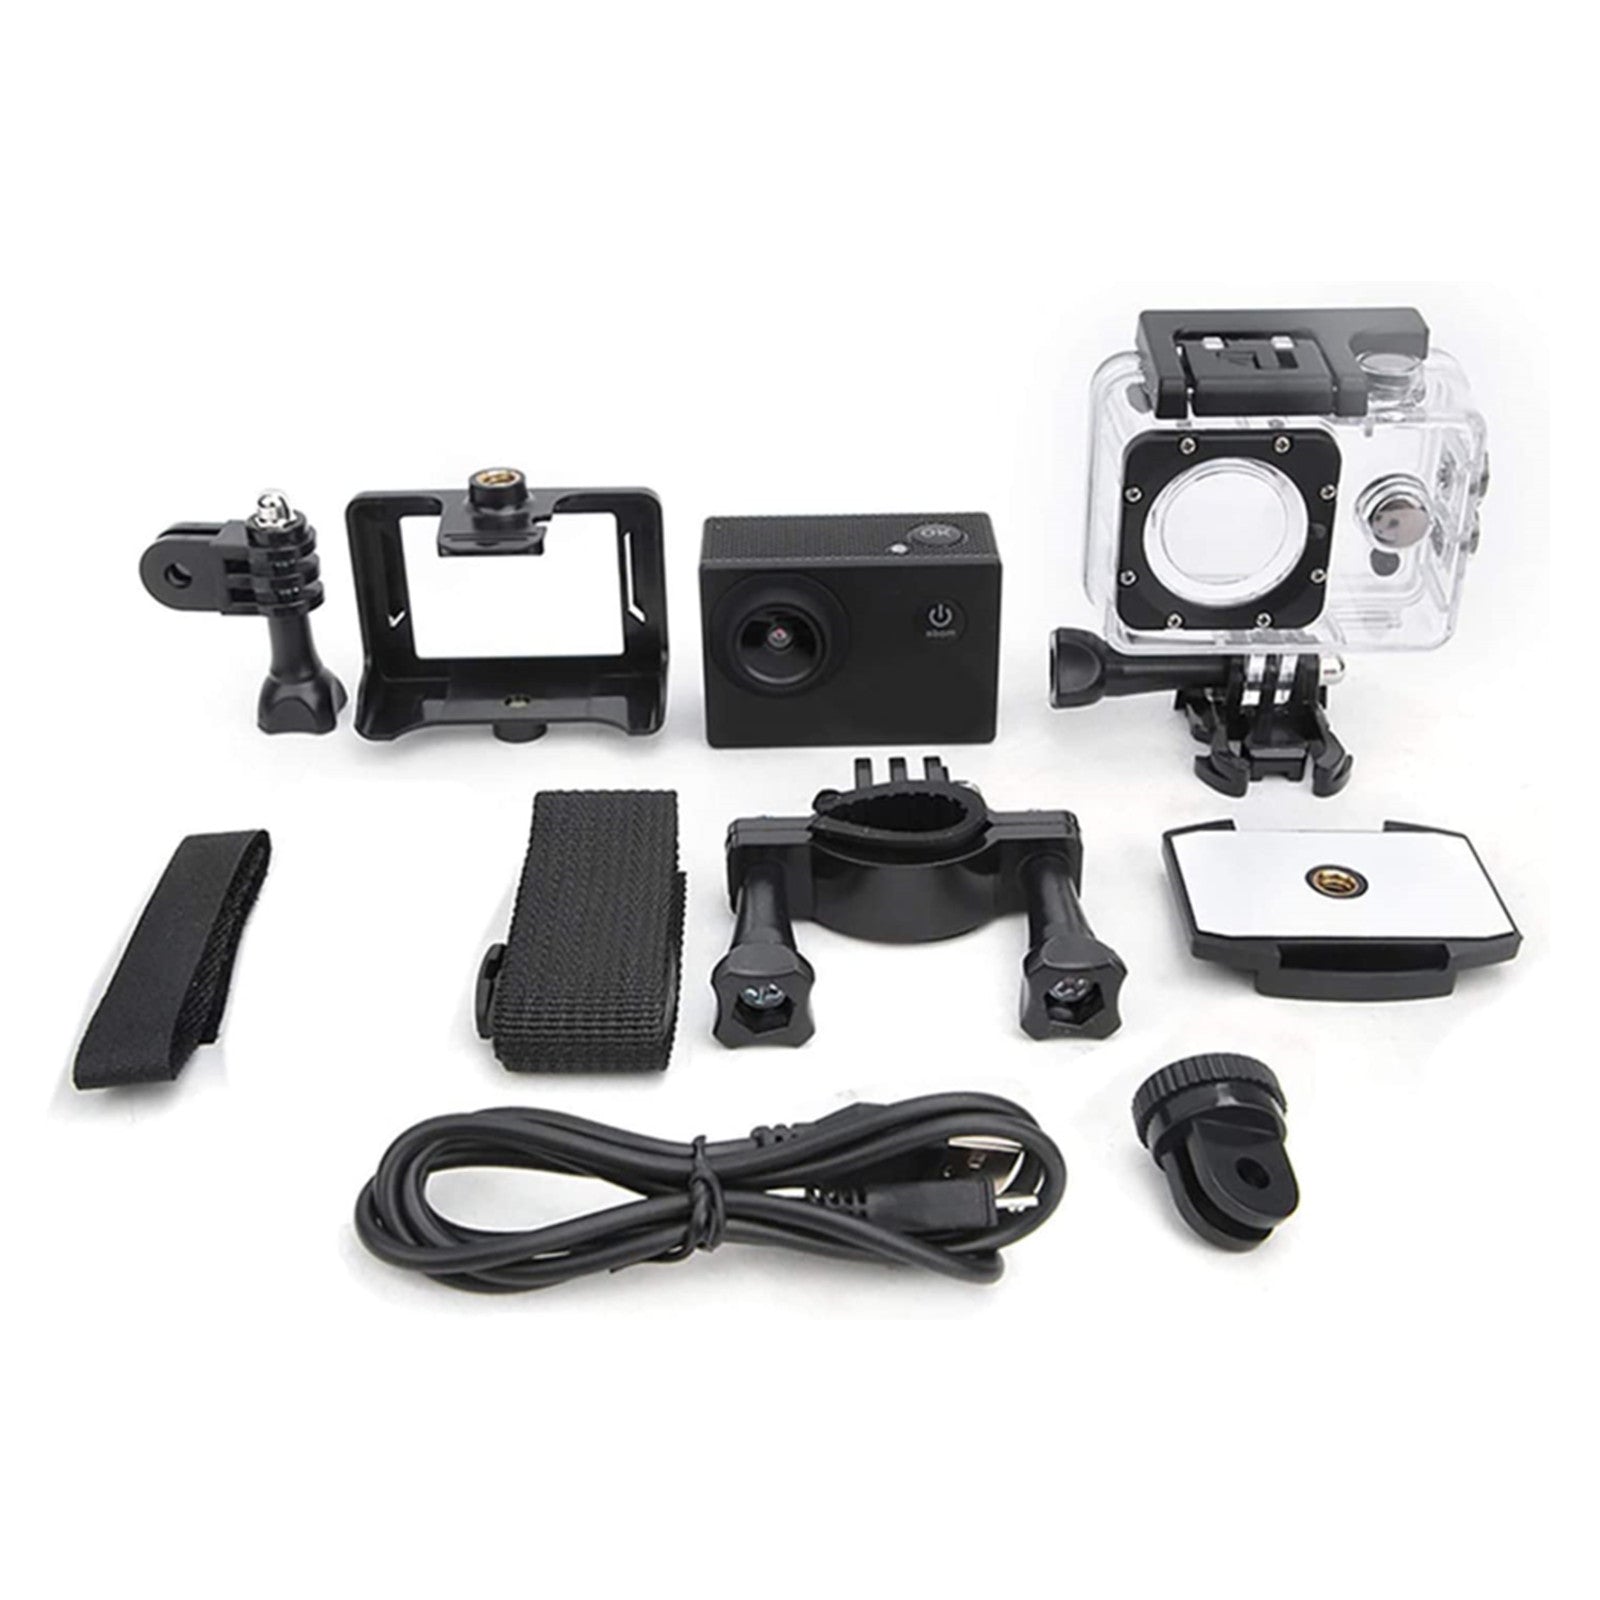 Underwater Sport Camera 13MP FHD WiFi 140 Degree Wide Angle with 2 Inch LCD Screen